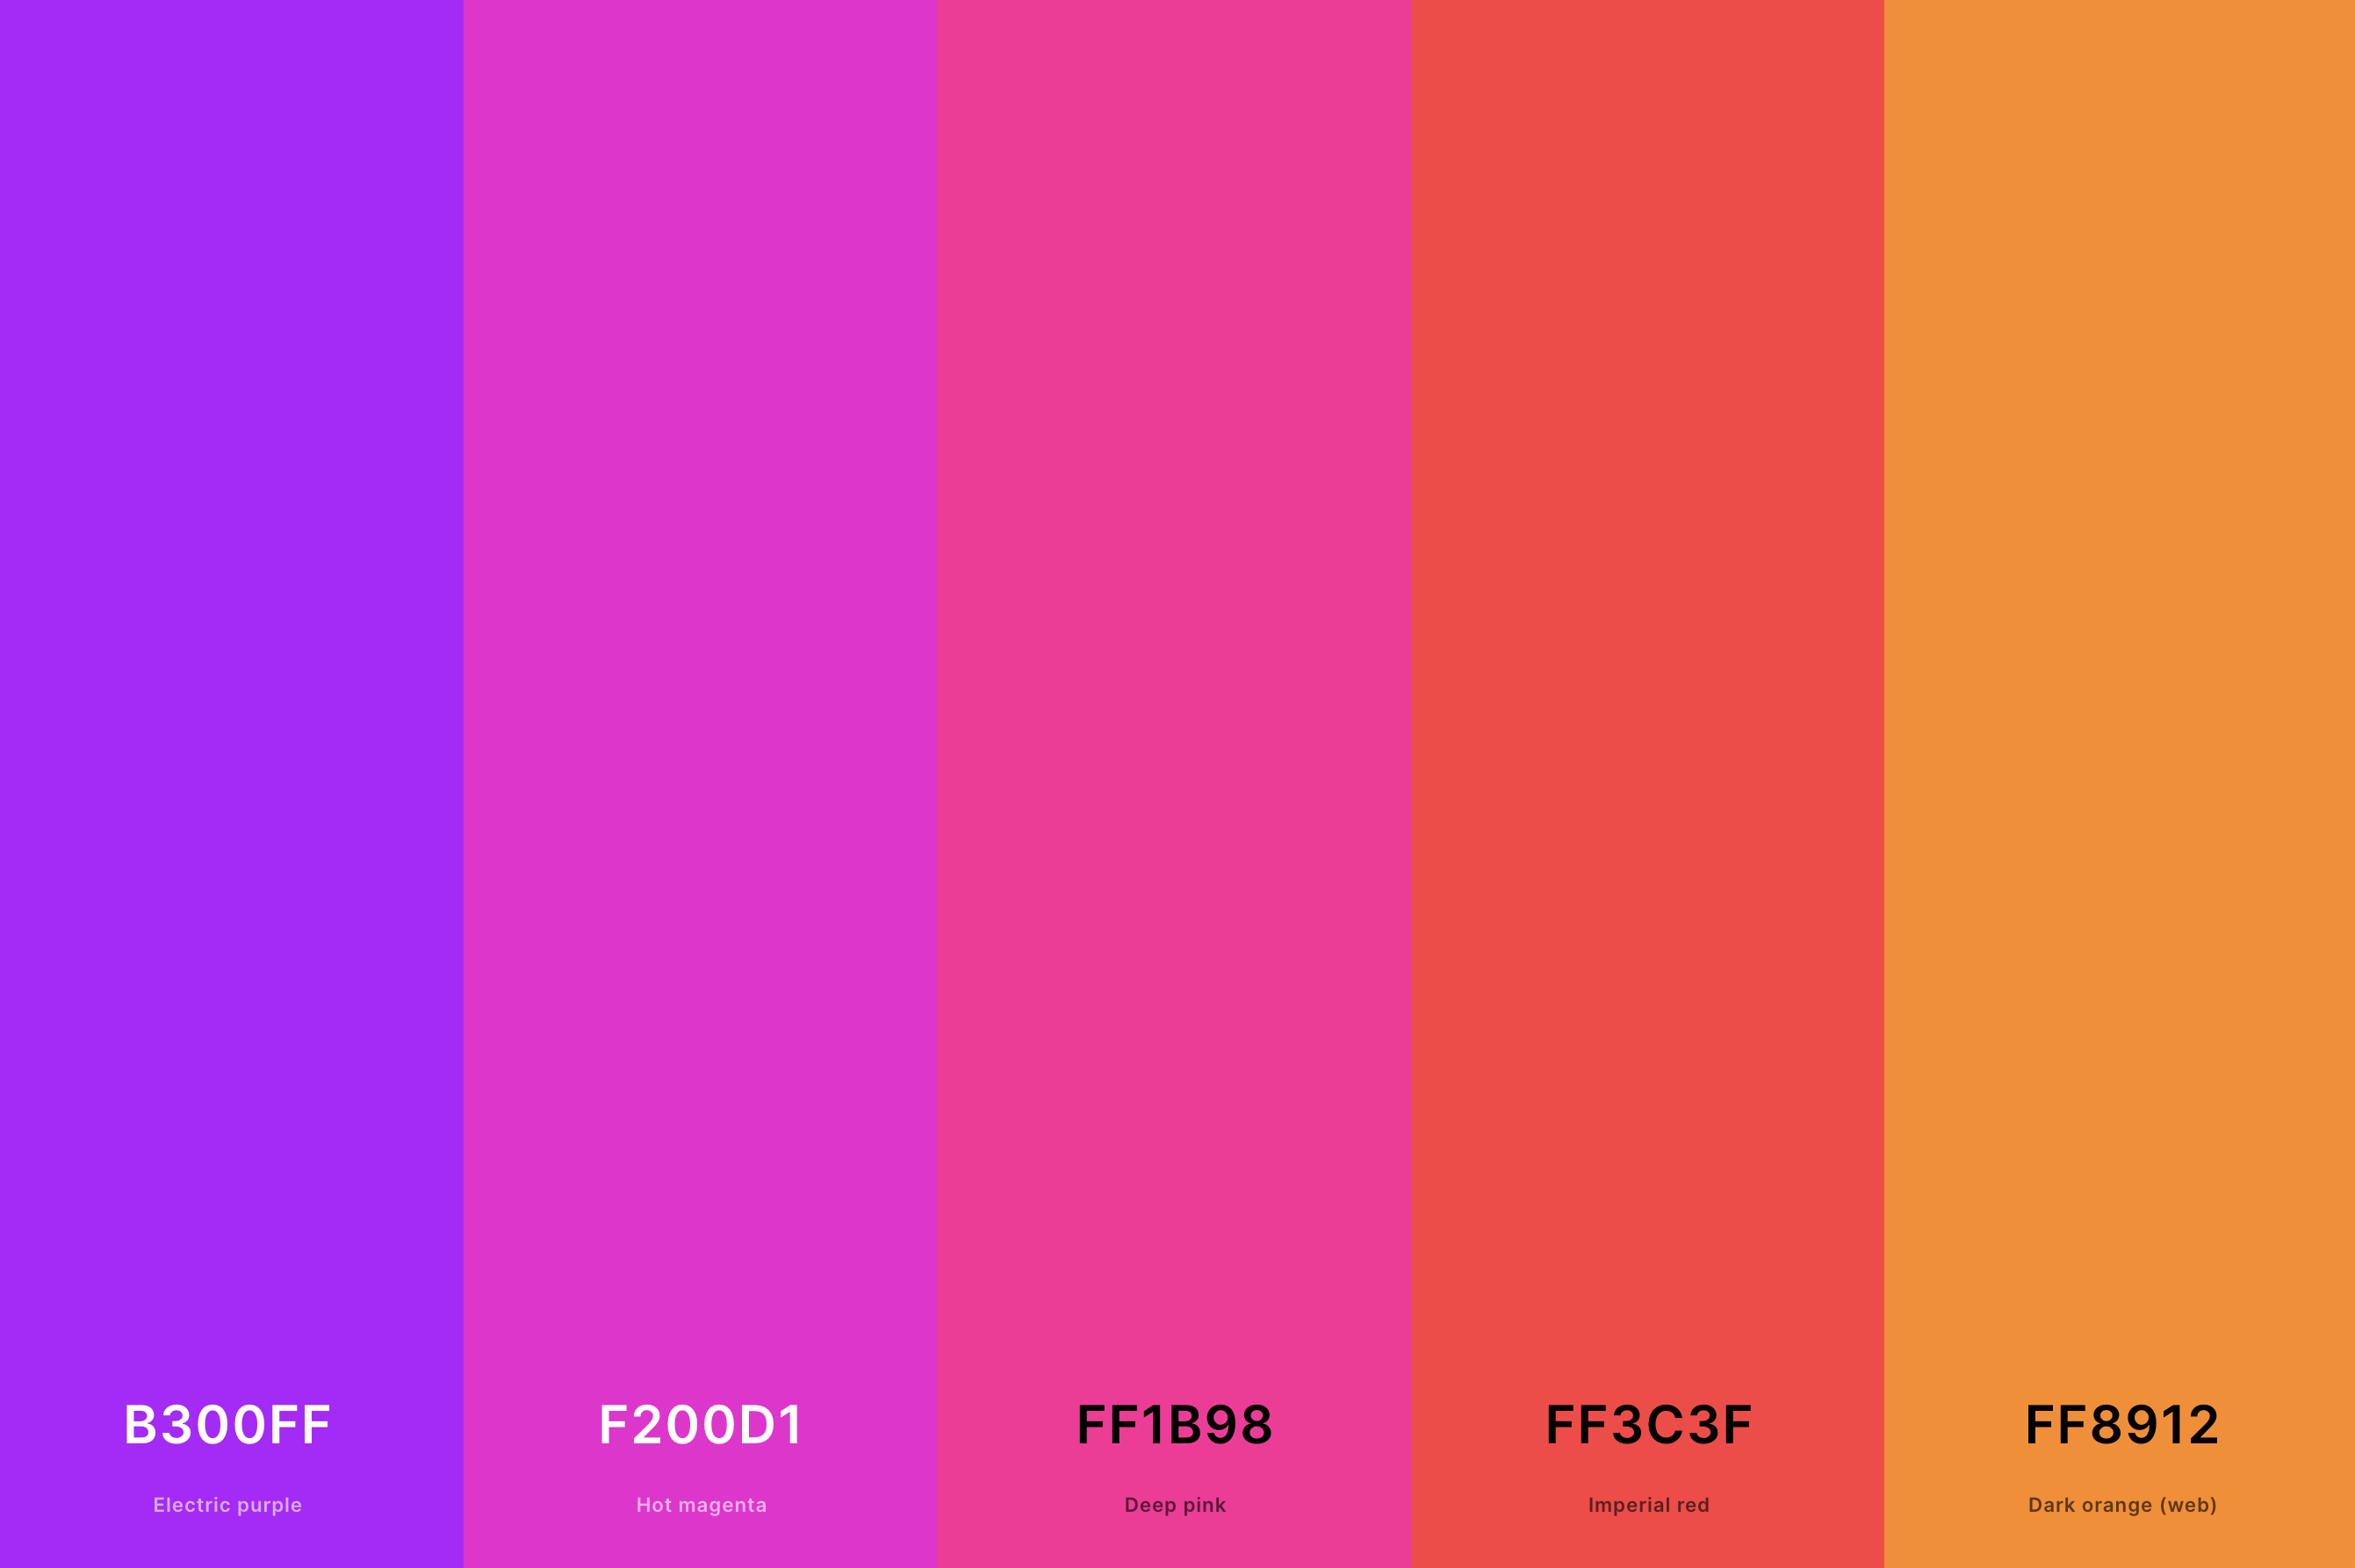 23. Neon Sunset Color Palette Color Palette with Electric Purple (Hex #B300FF) + Hot Magenta (Hex #F200D1) + Deep Pink (Hex #FF1B98) + Imperial Red (Hex #FF3C3F) + Dark Orange (Web) (Hex #FF8912) Color Palette with Hex Codes